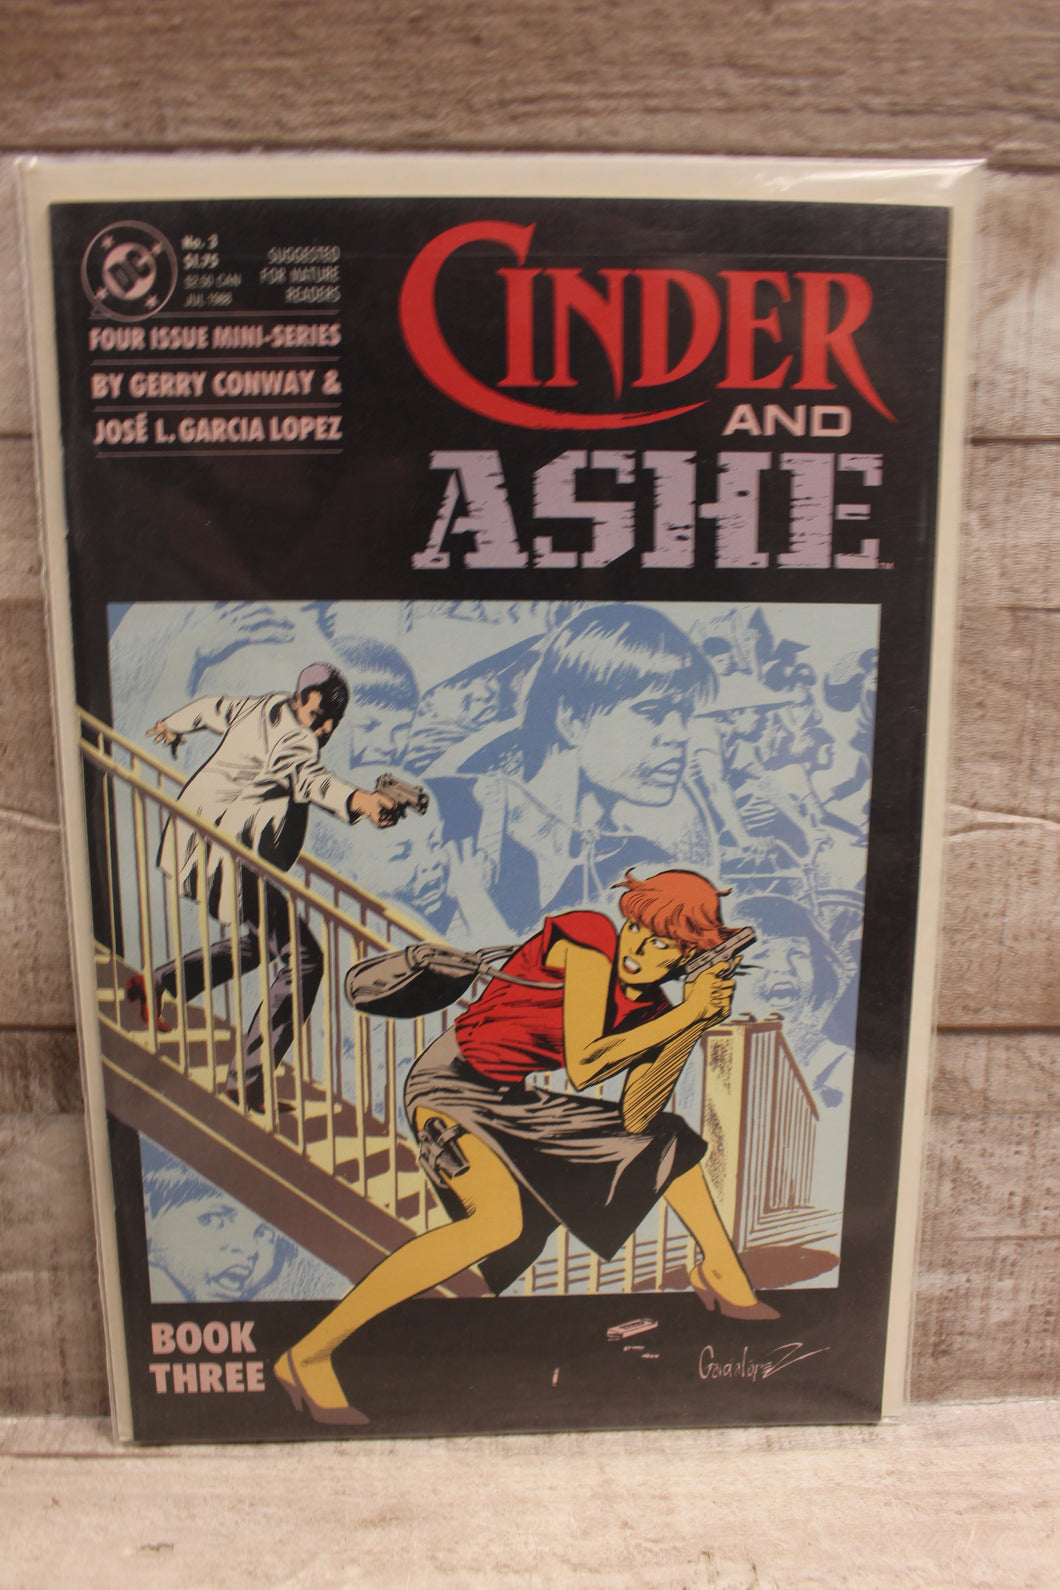 DC Comics Cinder and Ashe Book #3 Comic Book -Used